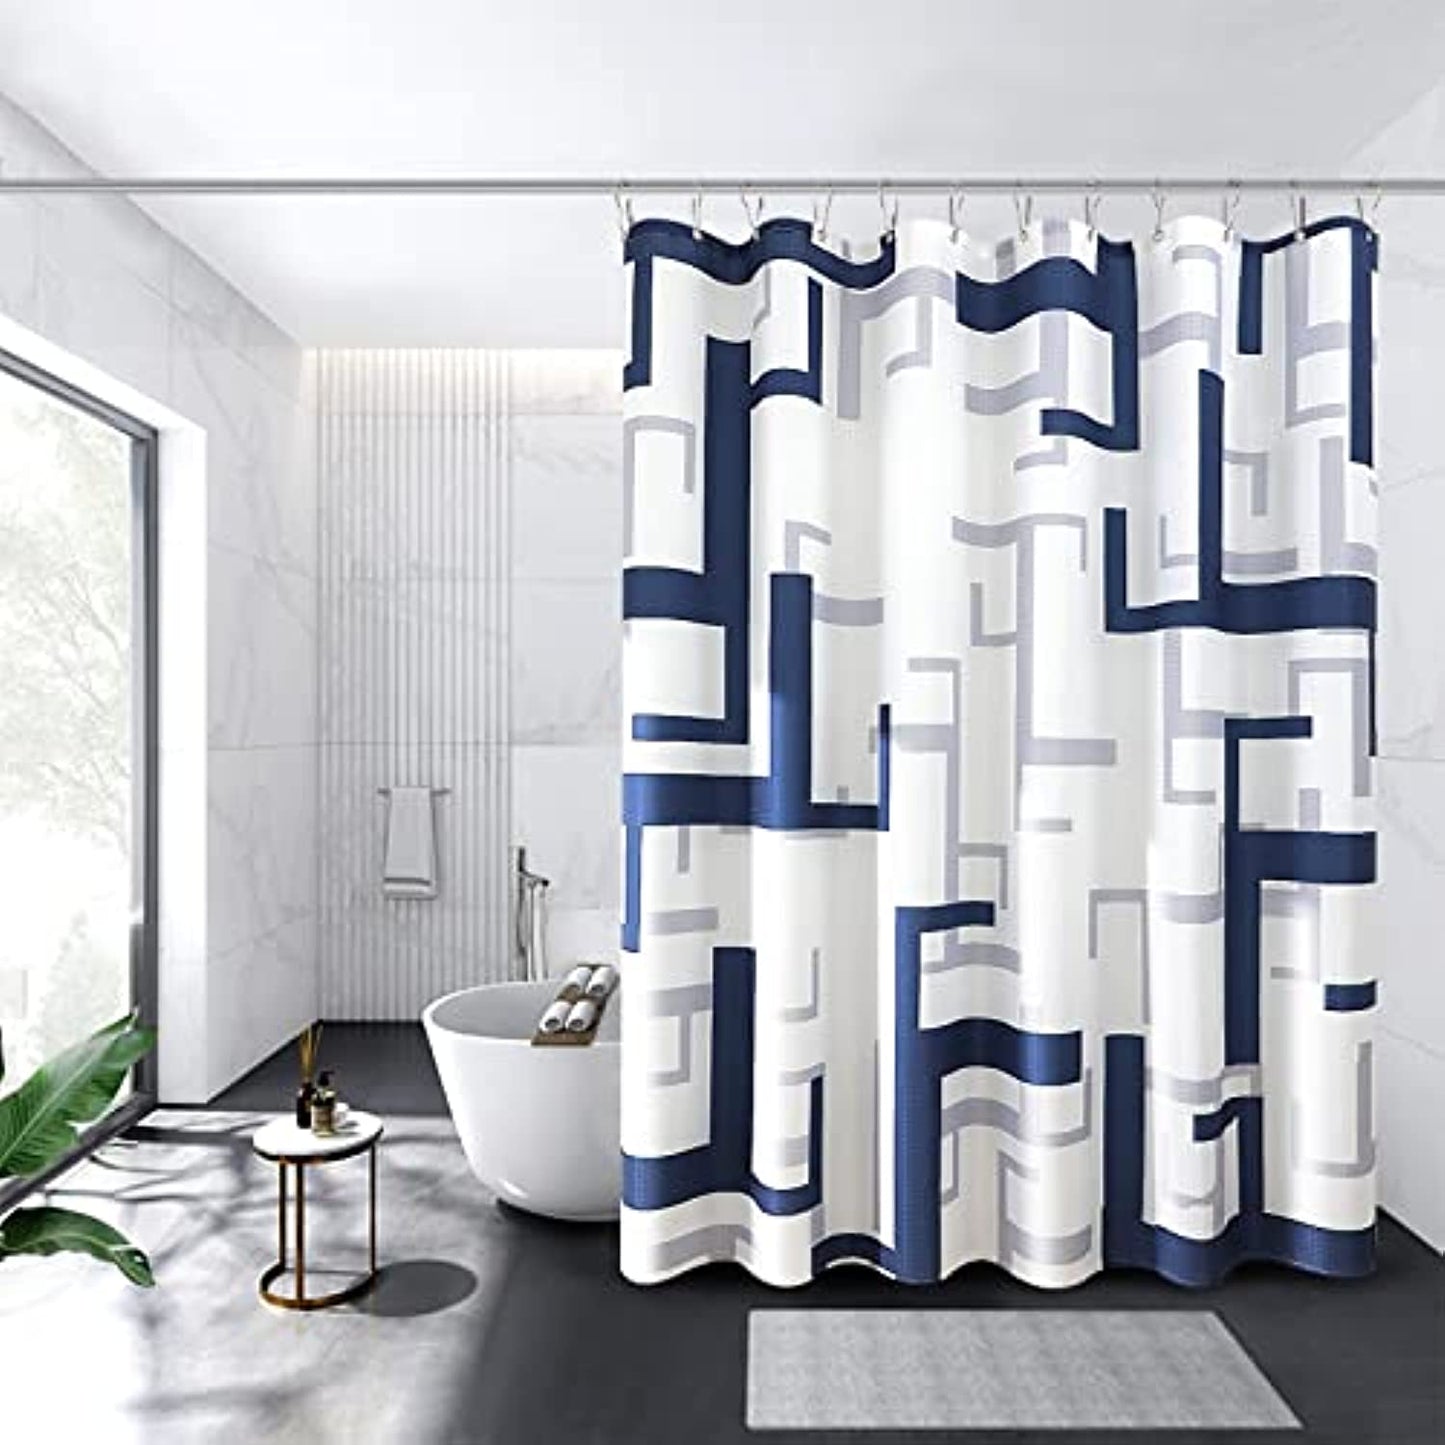 Modern Geometric Shower Curtain Blue  Waterproof Shower Curtains and Polyester Bath Curtain for Bathroom  Textured Fabric Shower Curtain Set with 12 Hooks  Machine Washable  72 x 72 inch